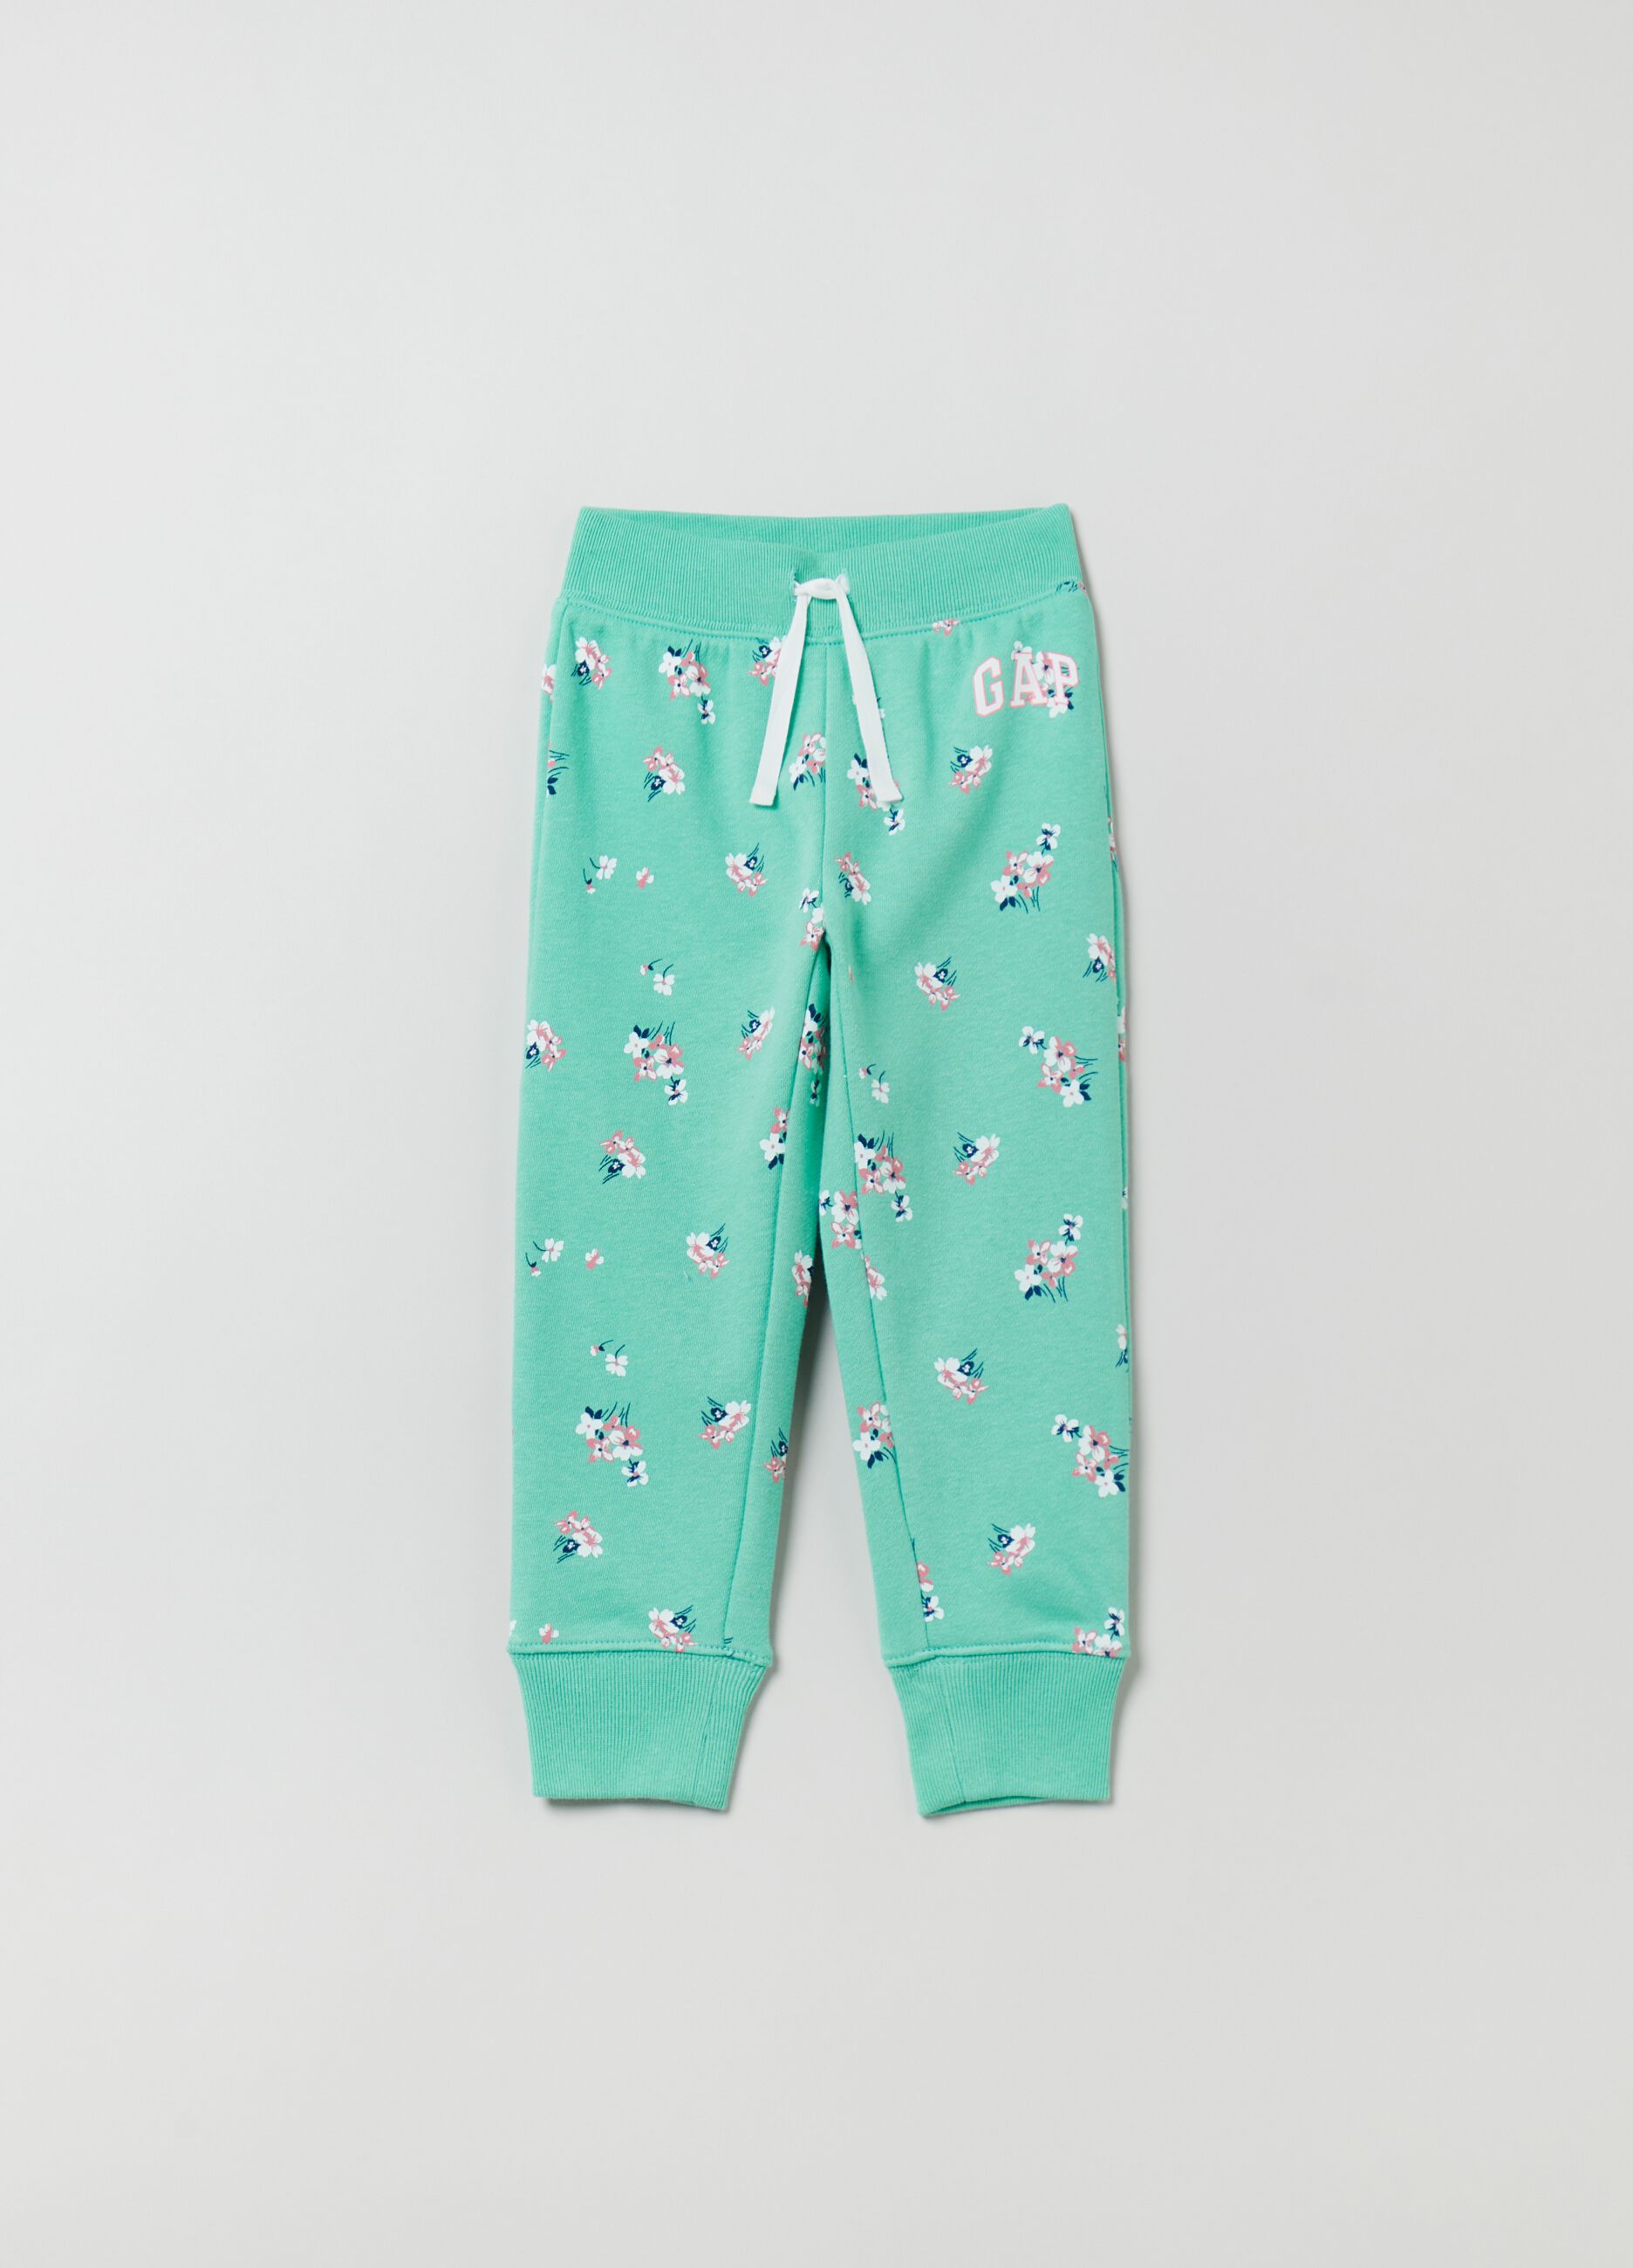 Joggers with floral print, logo and drawstring.